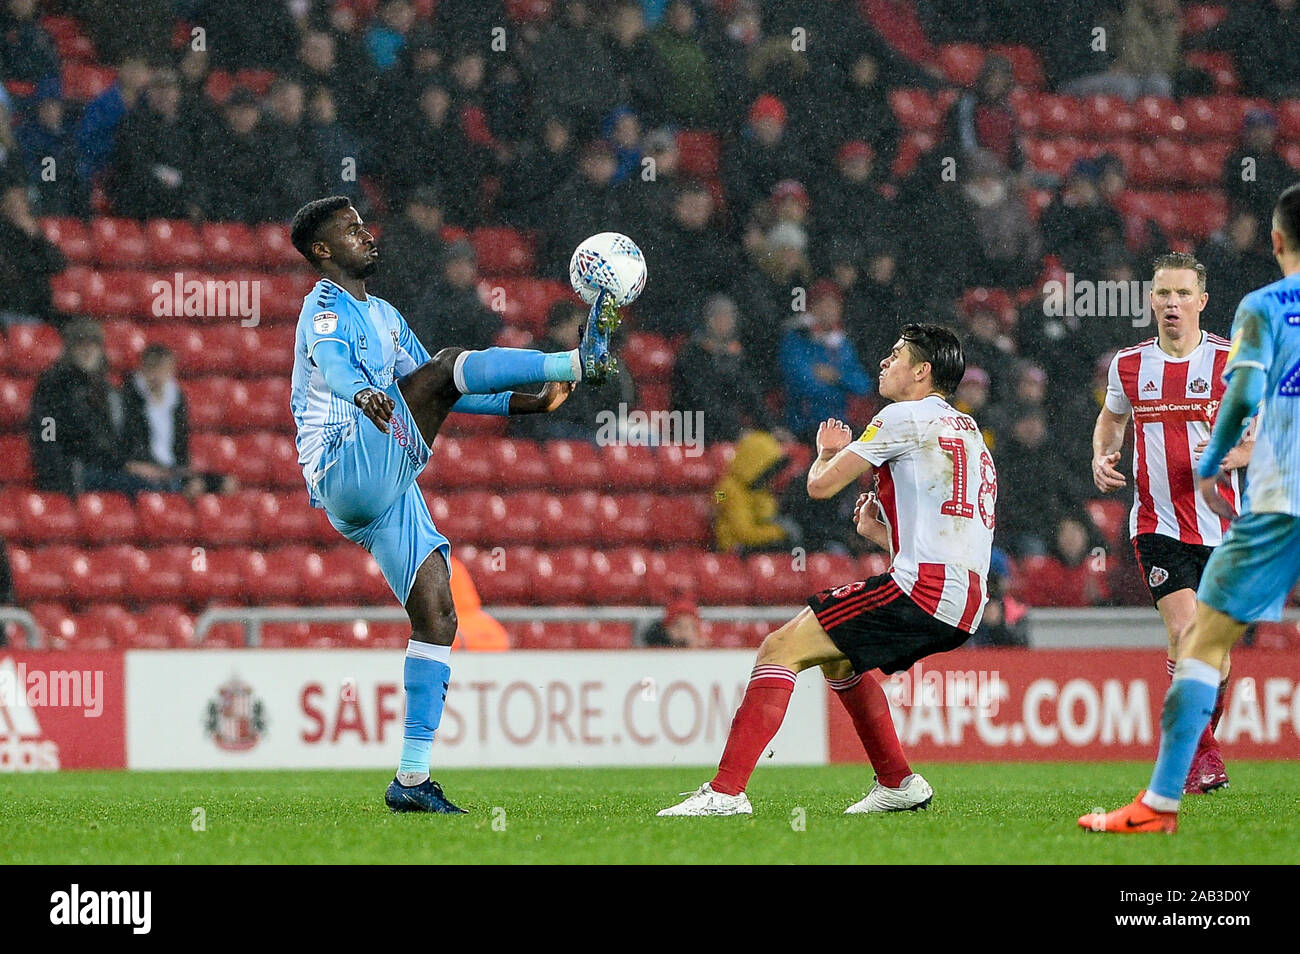 23rd November 2019, Stadium Of Light, Sunderland, England; Sky Bet League 1, Sunderland v Coventry City : Jordy Hiwula (11) of Coventry City controls the ball in front of George Dobson (18) of Sunderland Credit: Iam Burn/News Images Stock Photo